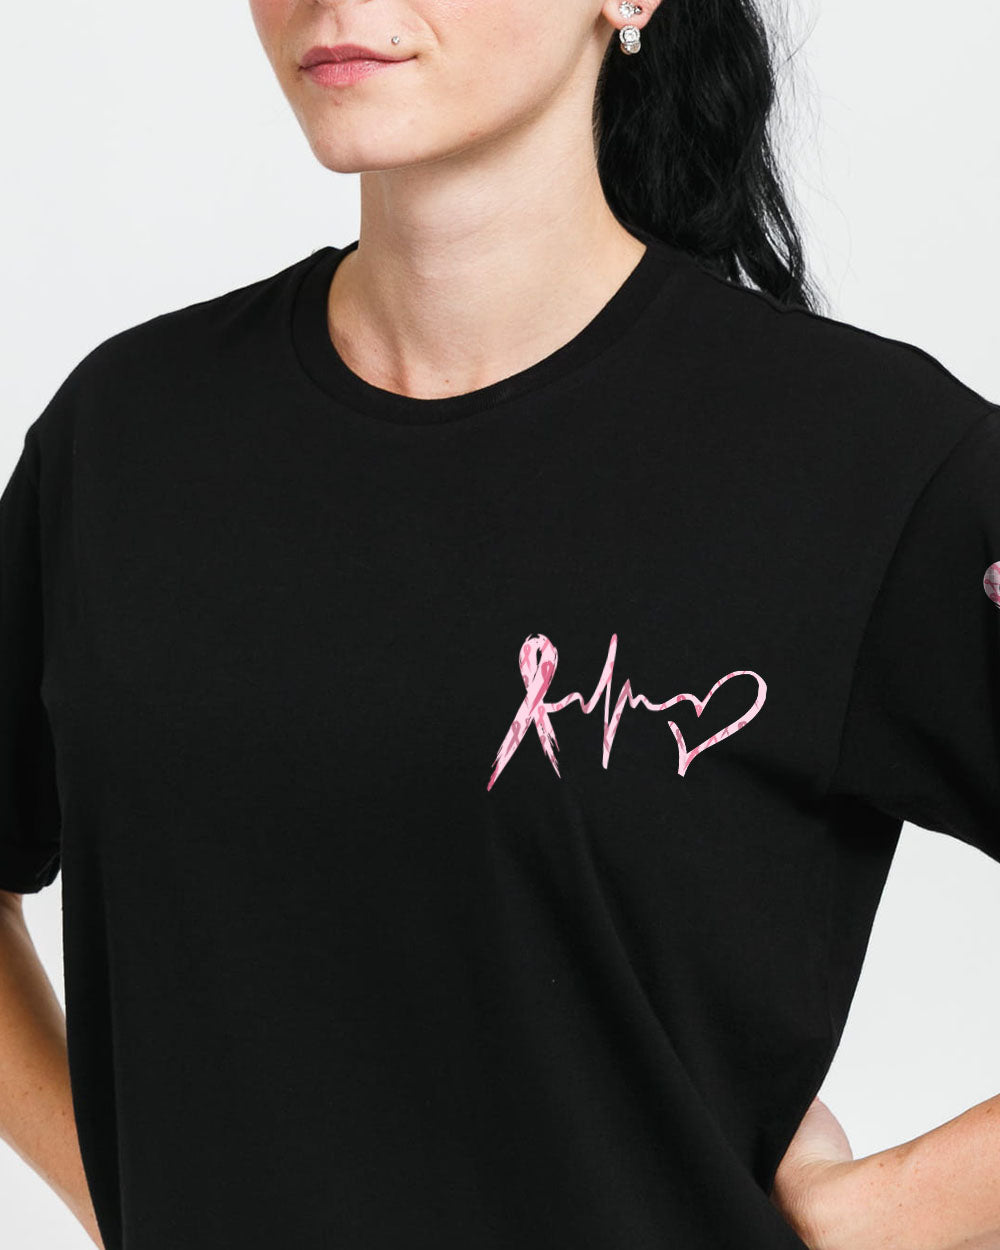 In This Family No One Fights Alone Pink Ribbon Flag Women's Breast Cancer Awareness Tshirt